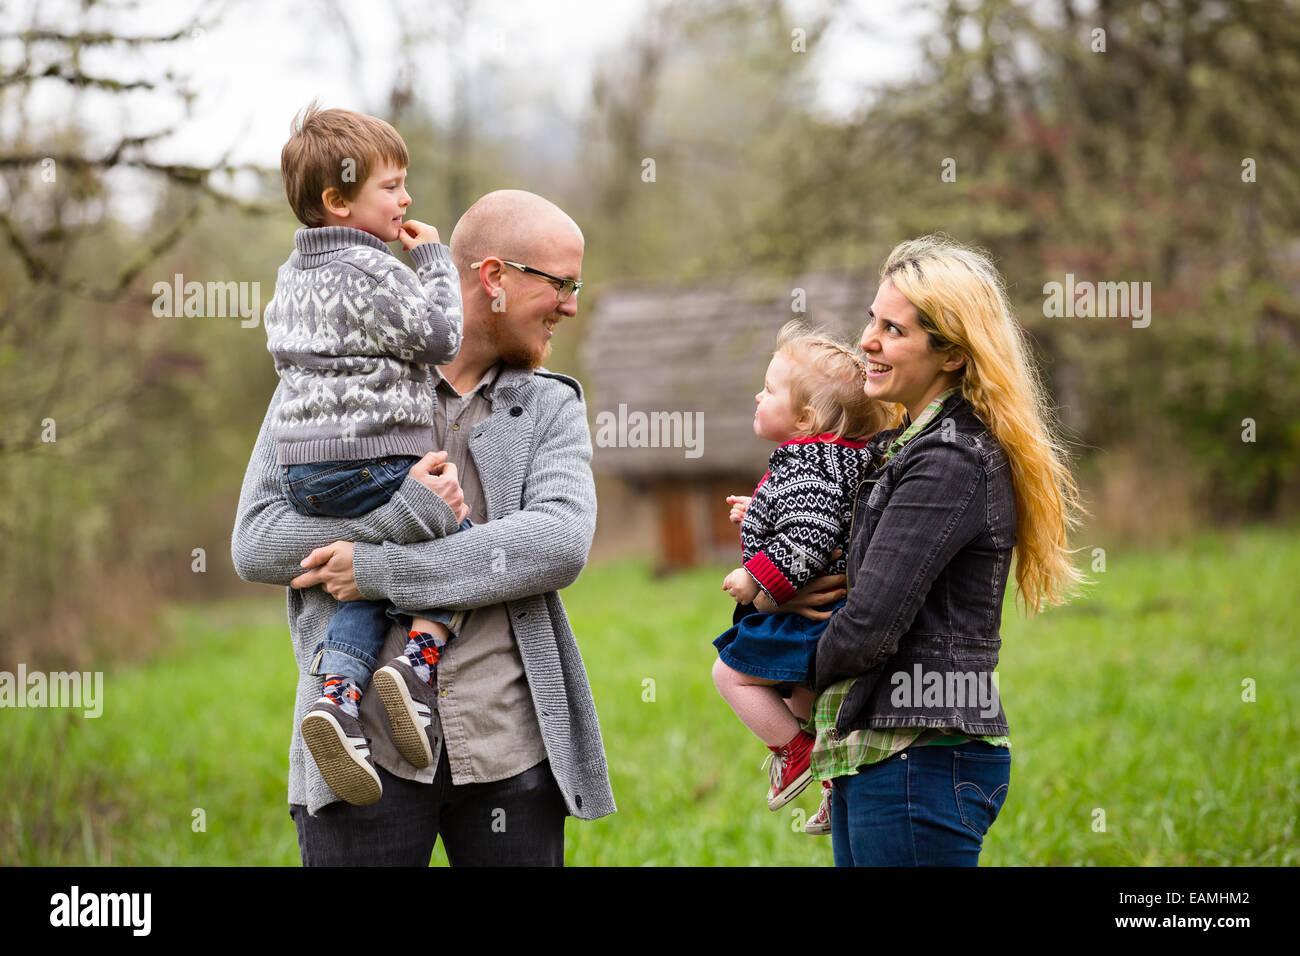 Lifestyle portrait of a family of four including a mother, father, son, and daughter interacting showing happiness. Stock Photo